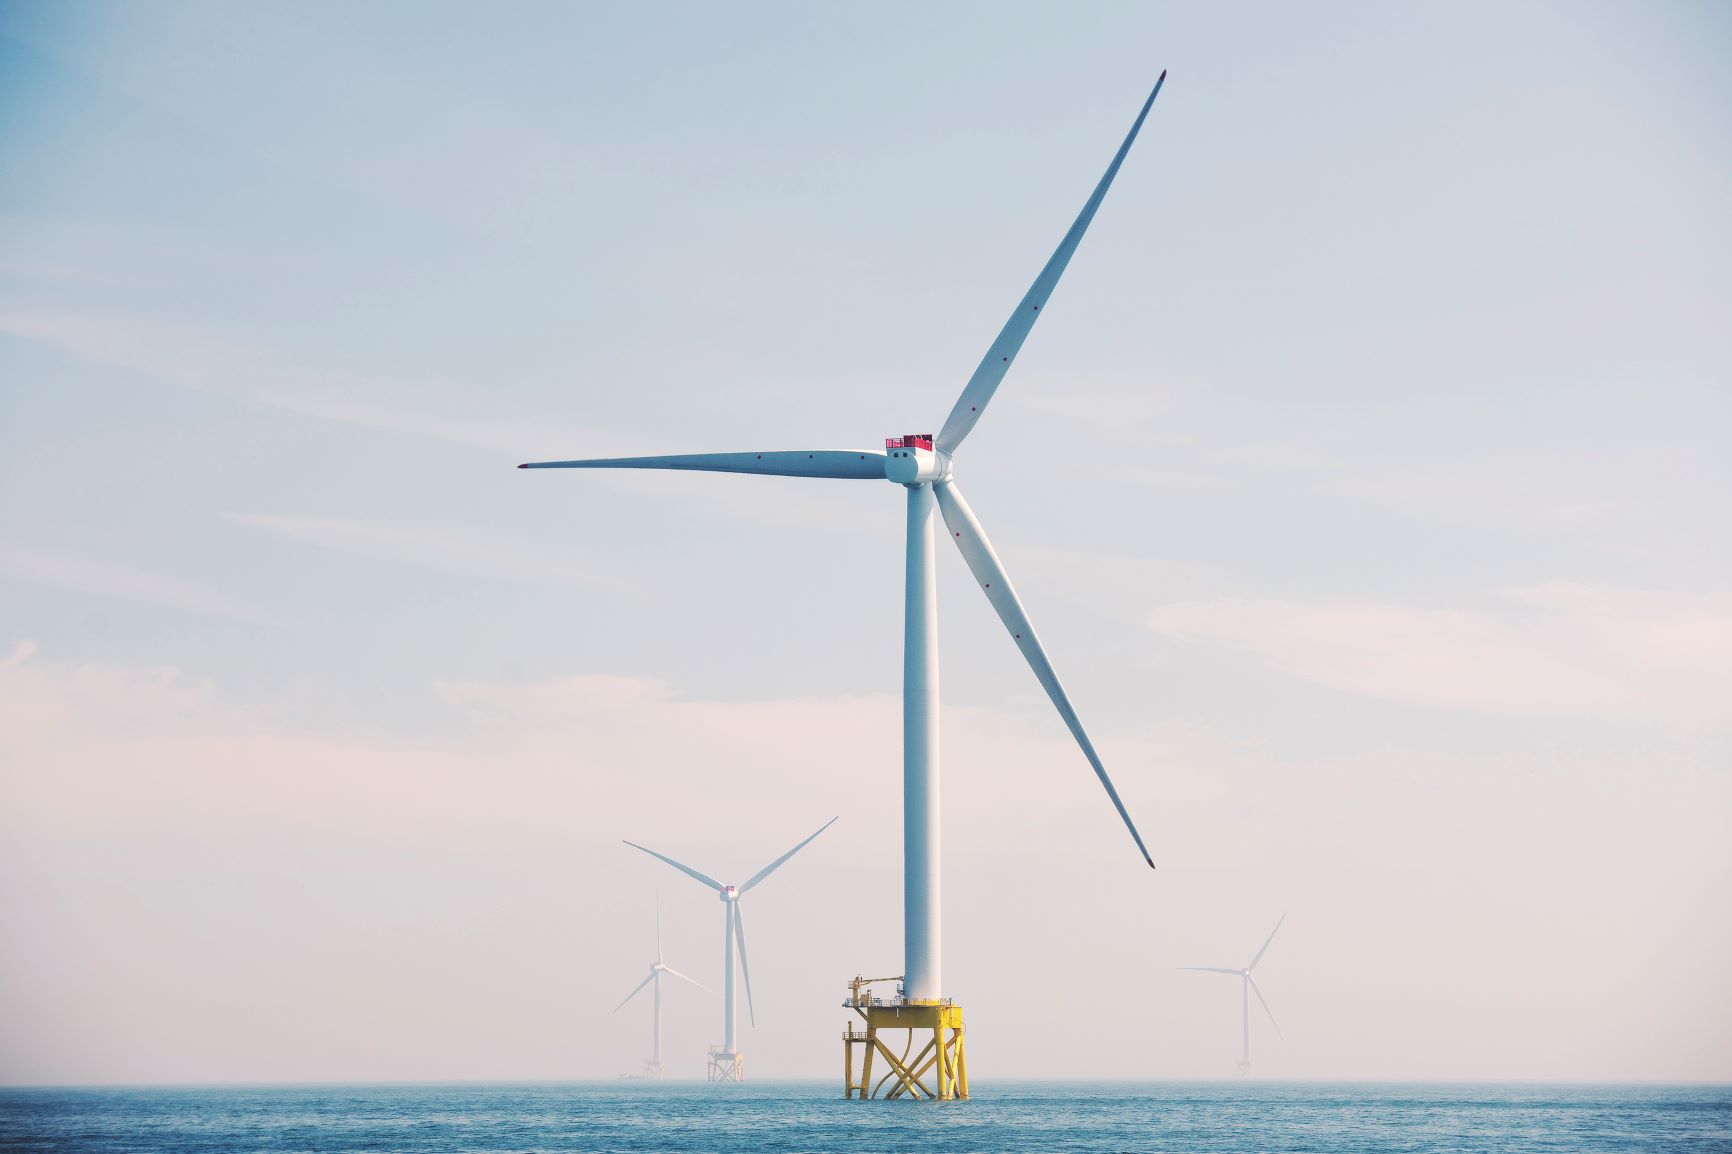 K2 Management secures LTA appointment for Inch Cape offshore wind project